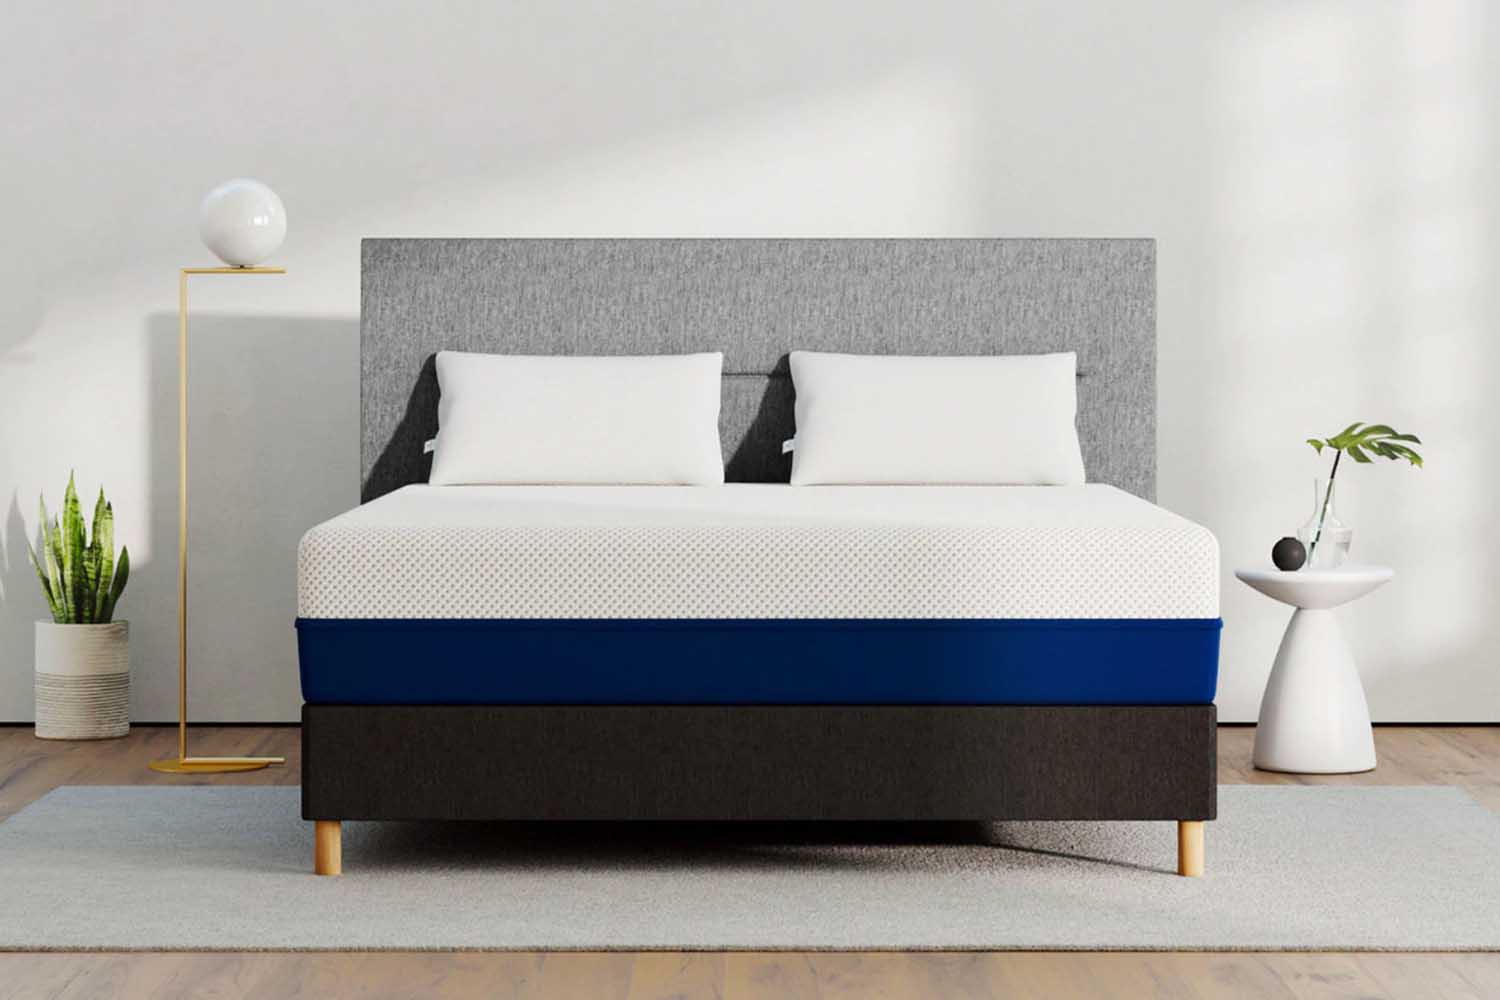 best selling mattresses in usa